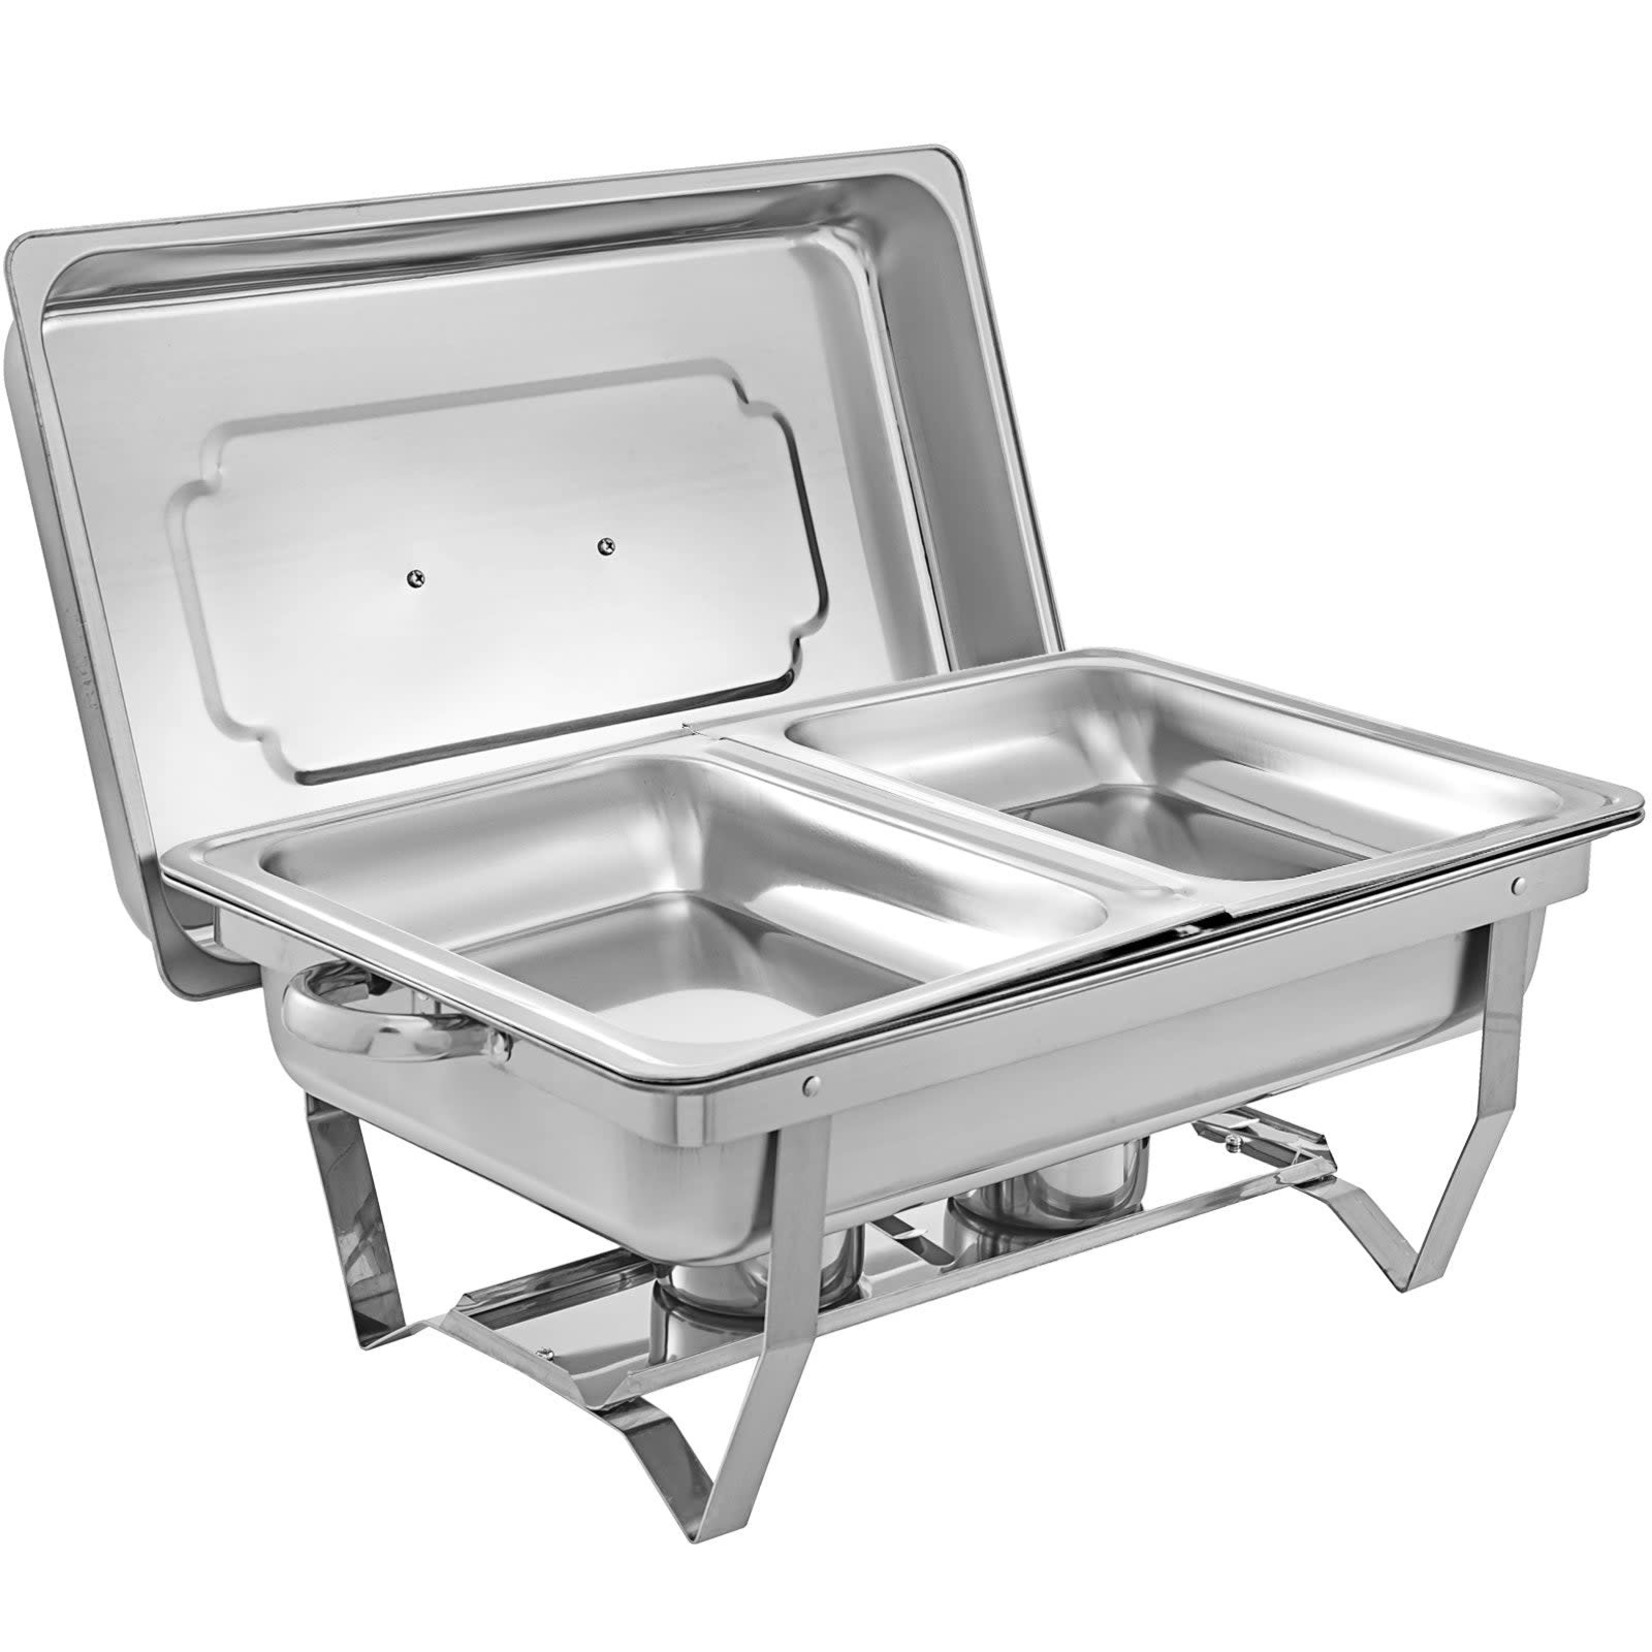 Stainless Steel 8qt Chafer 2 Half Trays